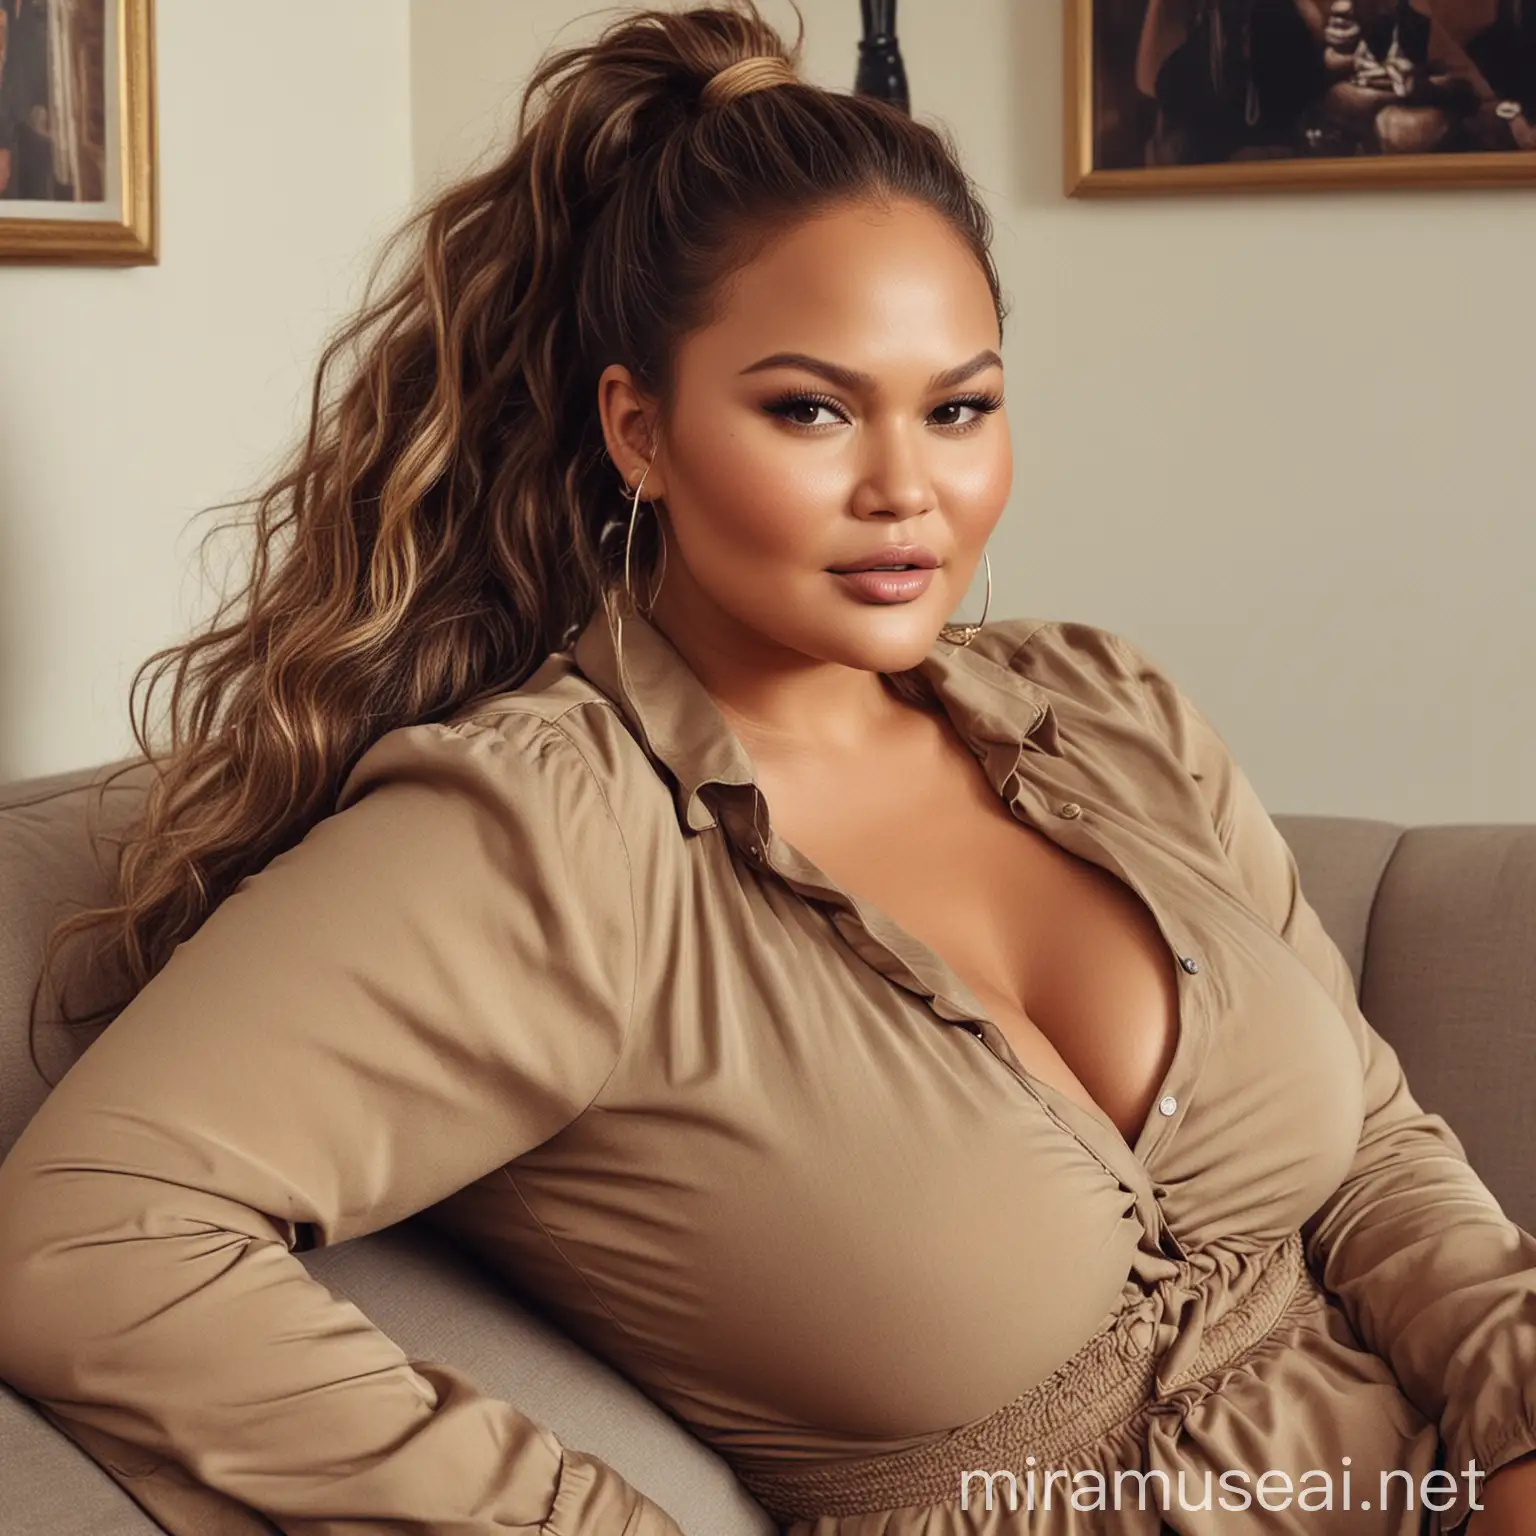 Chrissy Teigen Sitting on Couch with Stunning Cleavage Display